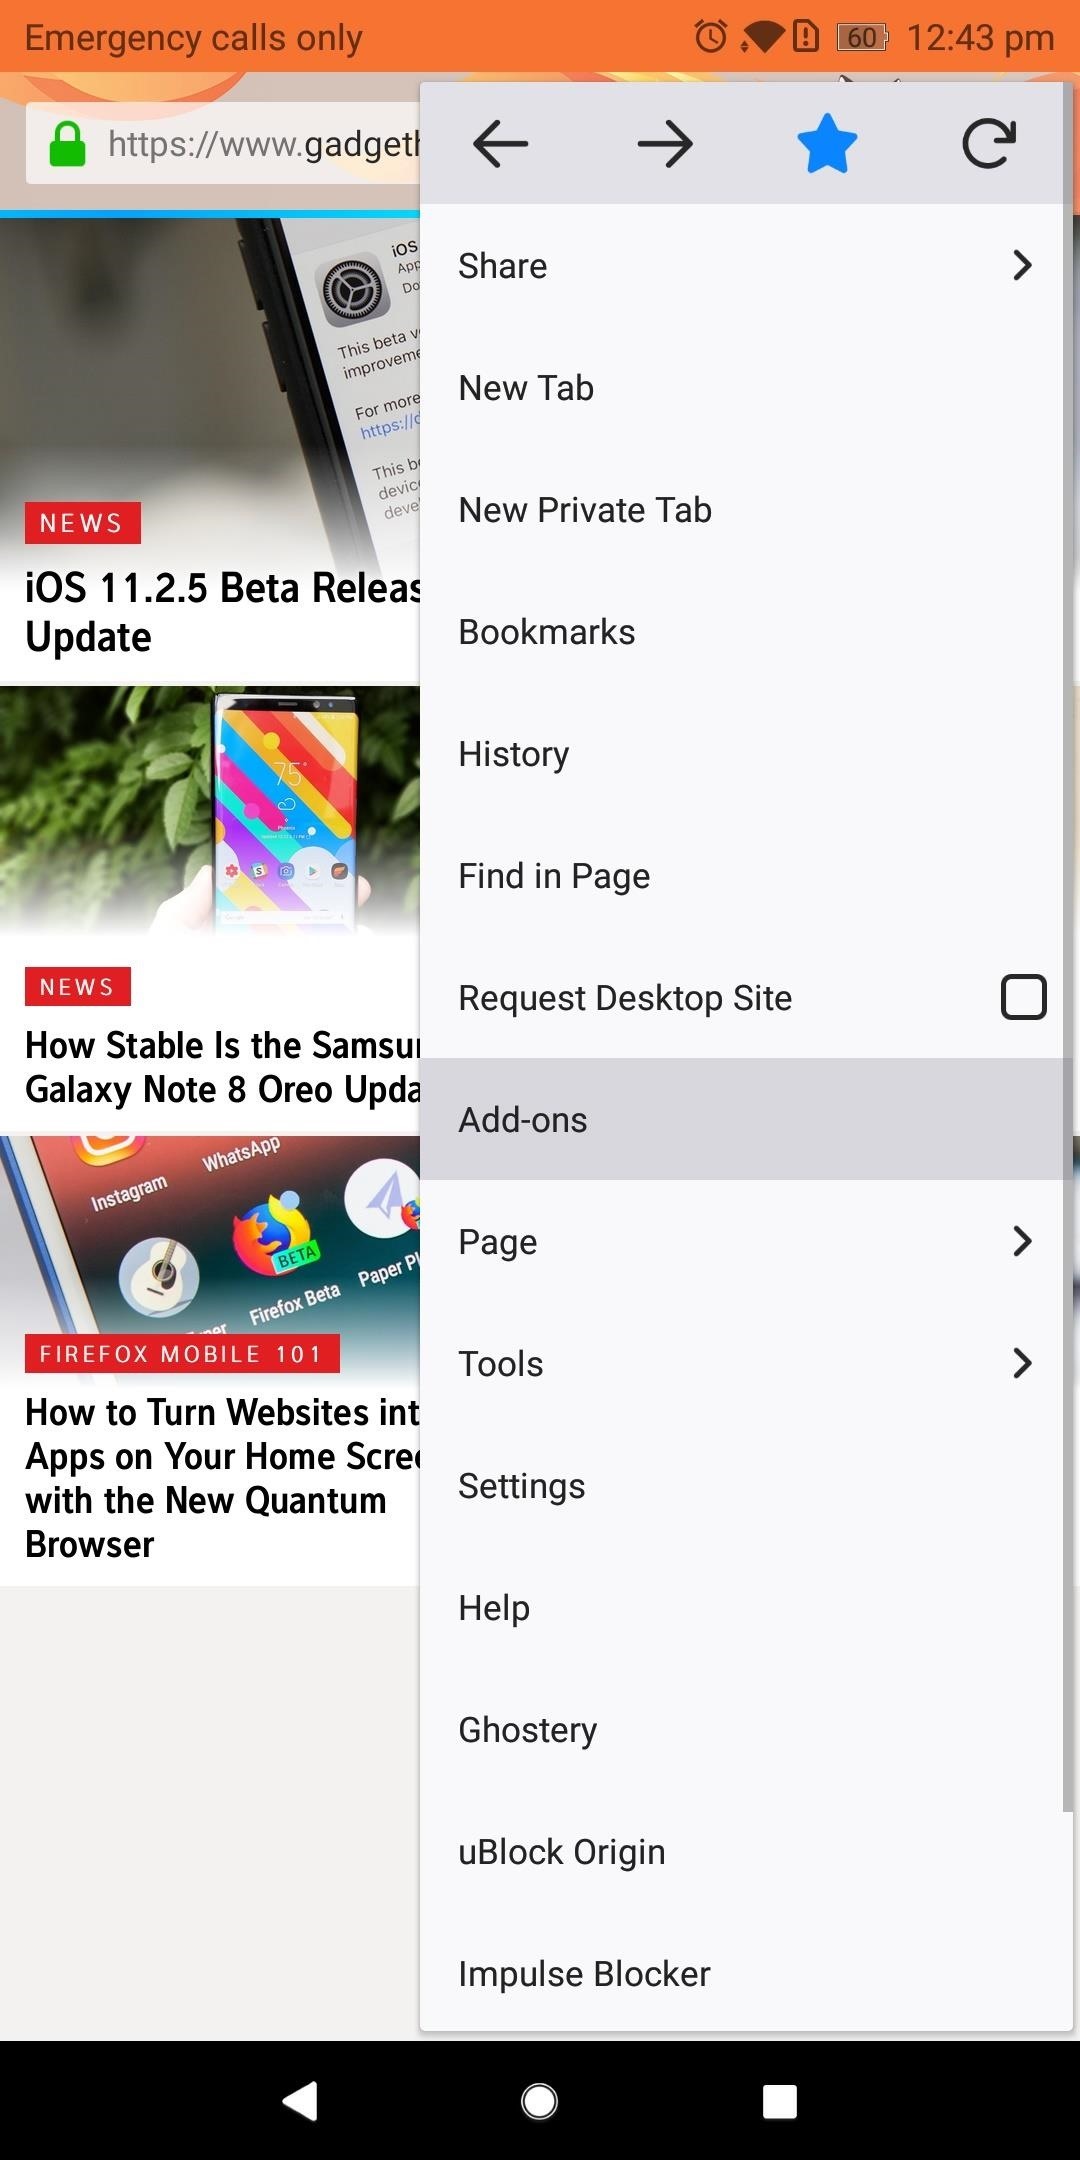 Firefox Mobile 101: Add New Functionality to Your Browser with Extensions